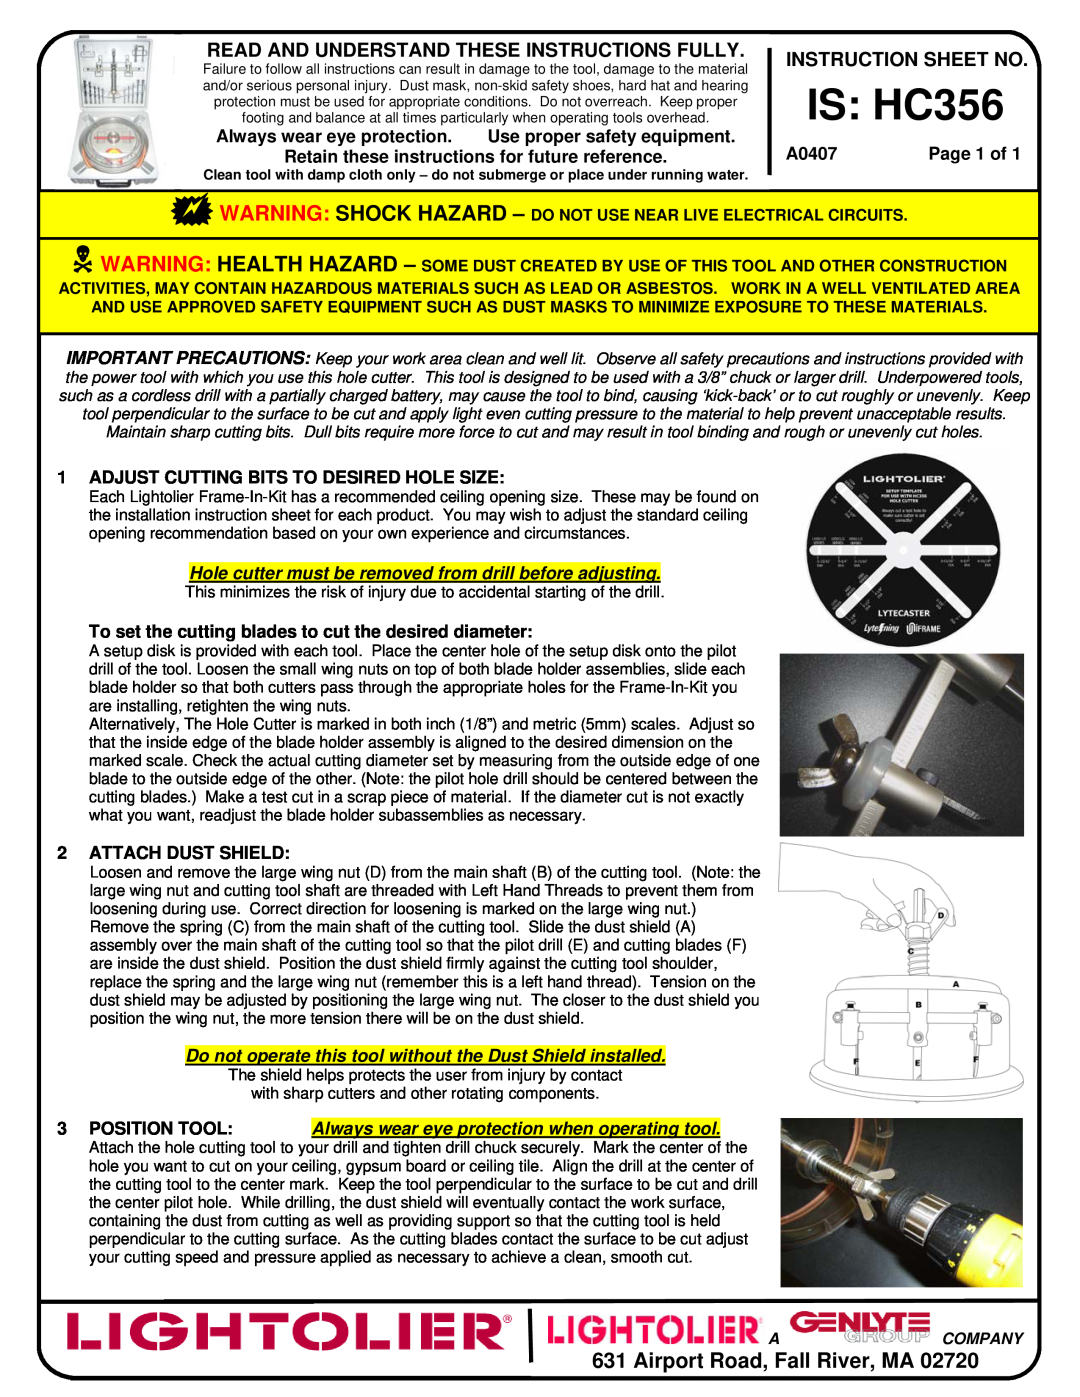 Lightolier IS:HC356 instruction sheet IS HC356, Airport Road, Fall River, MA, Read And Understand These Instructions Fully 